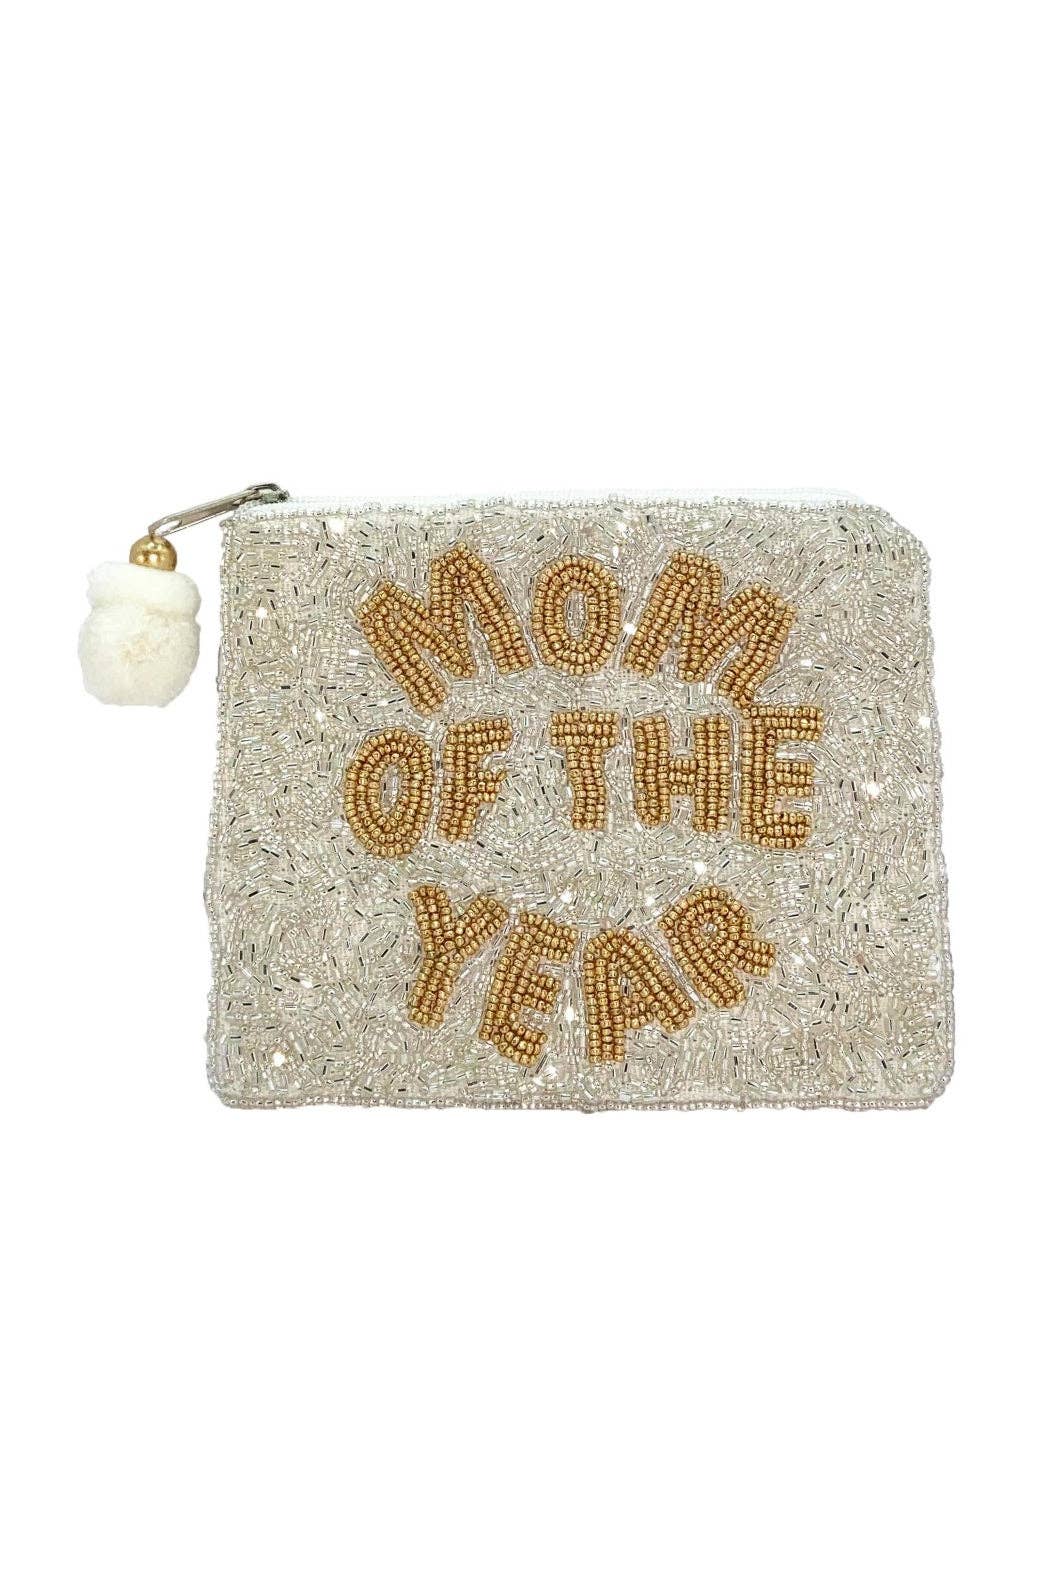 Embellish Your Life - Mom of the Year Beaded Pouch Bag